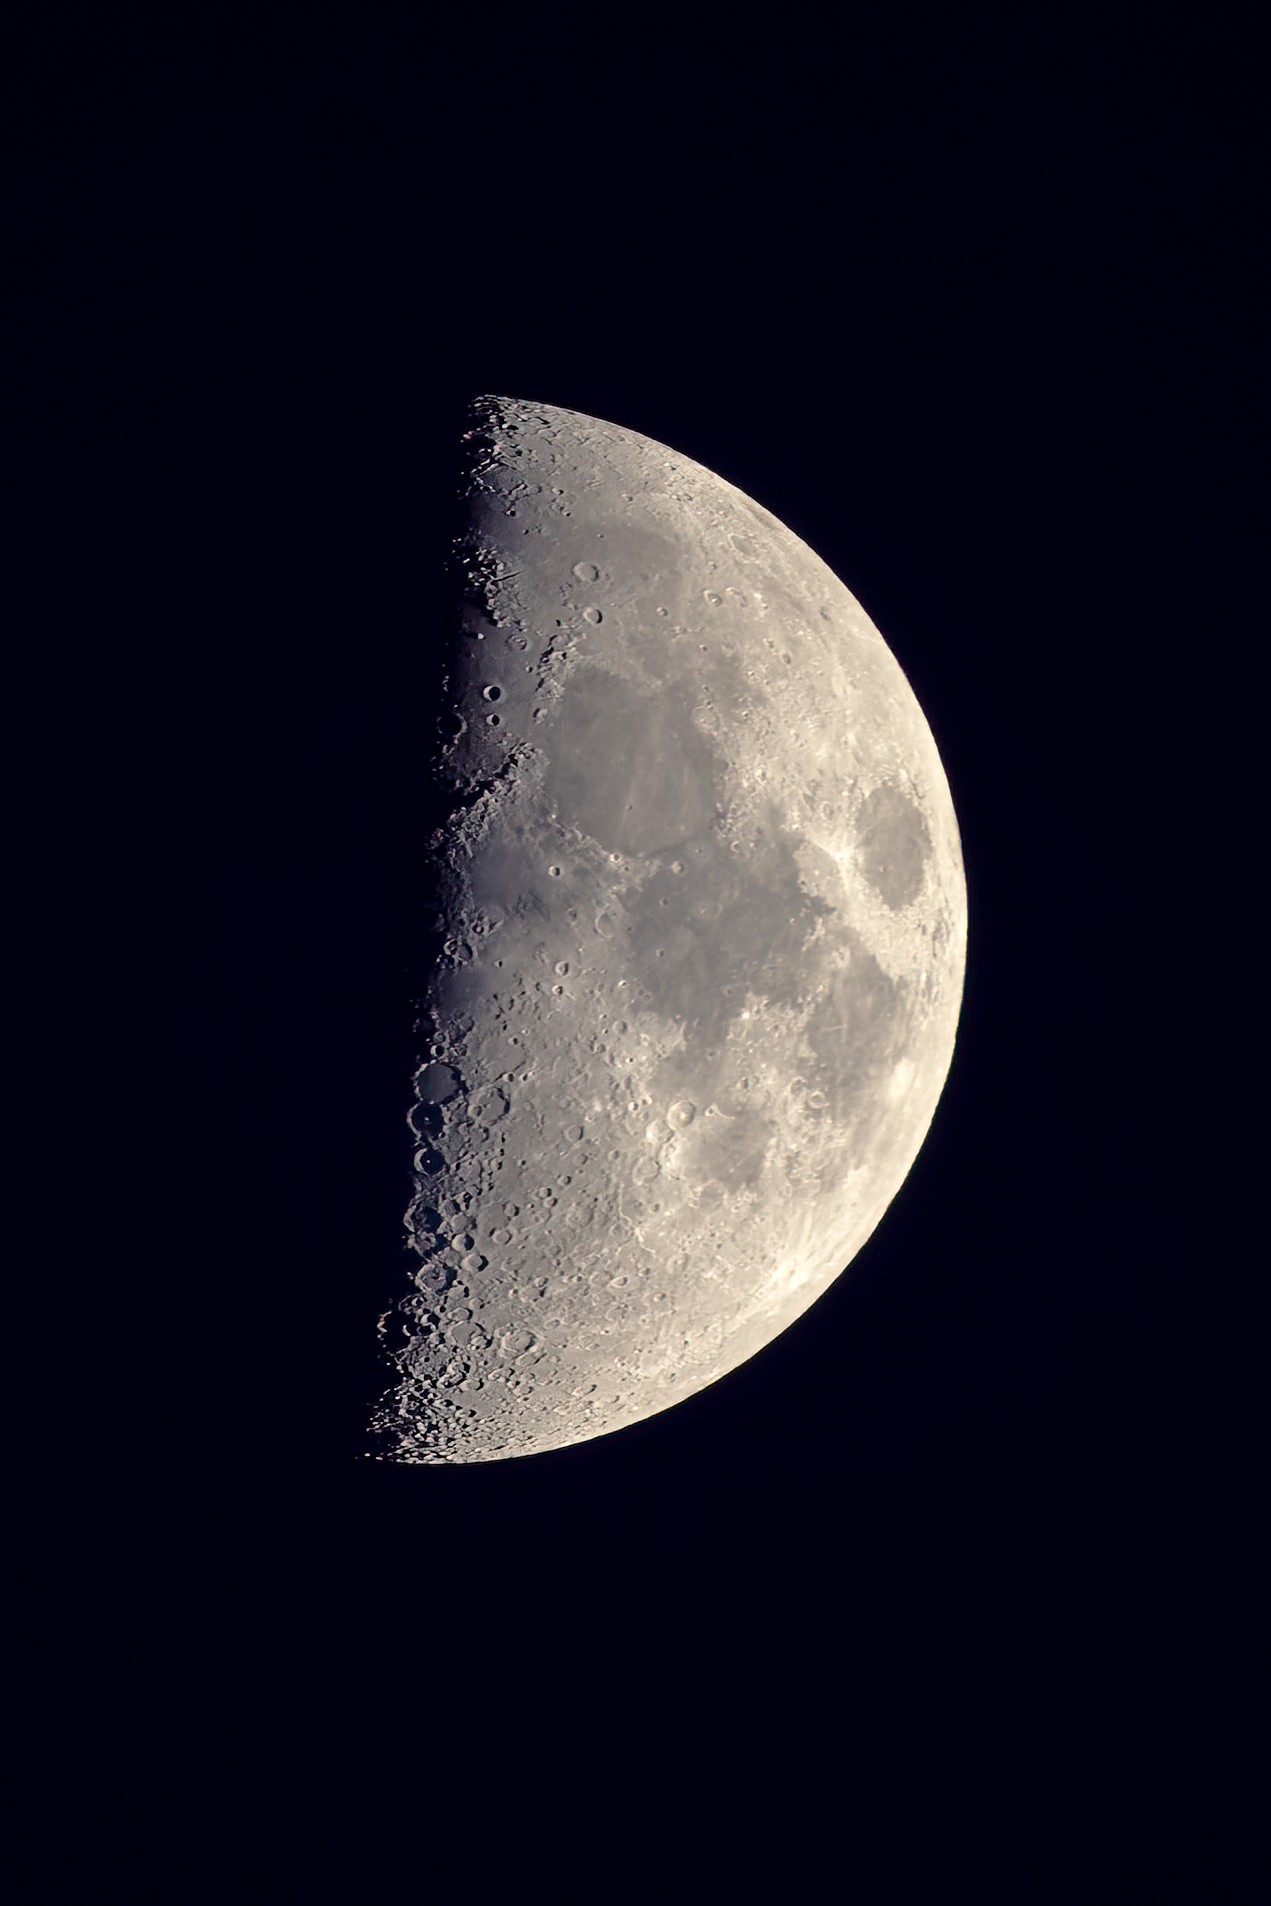 My first attempt at photographing the moon.